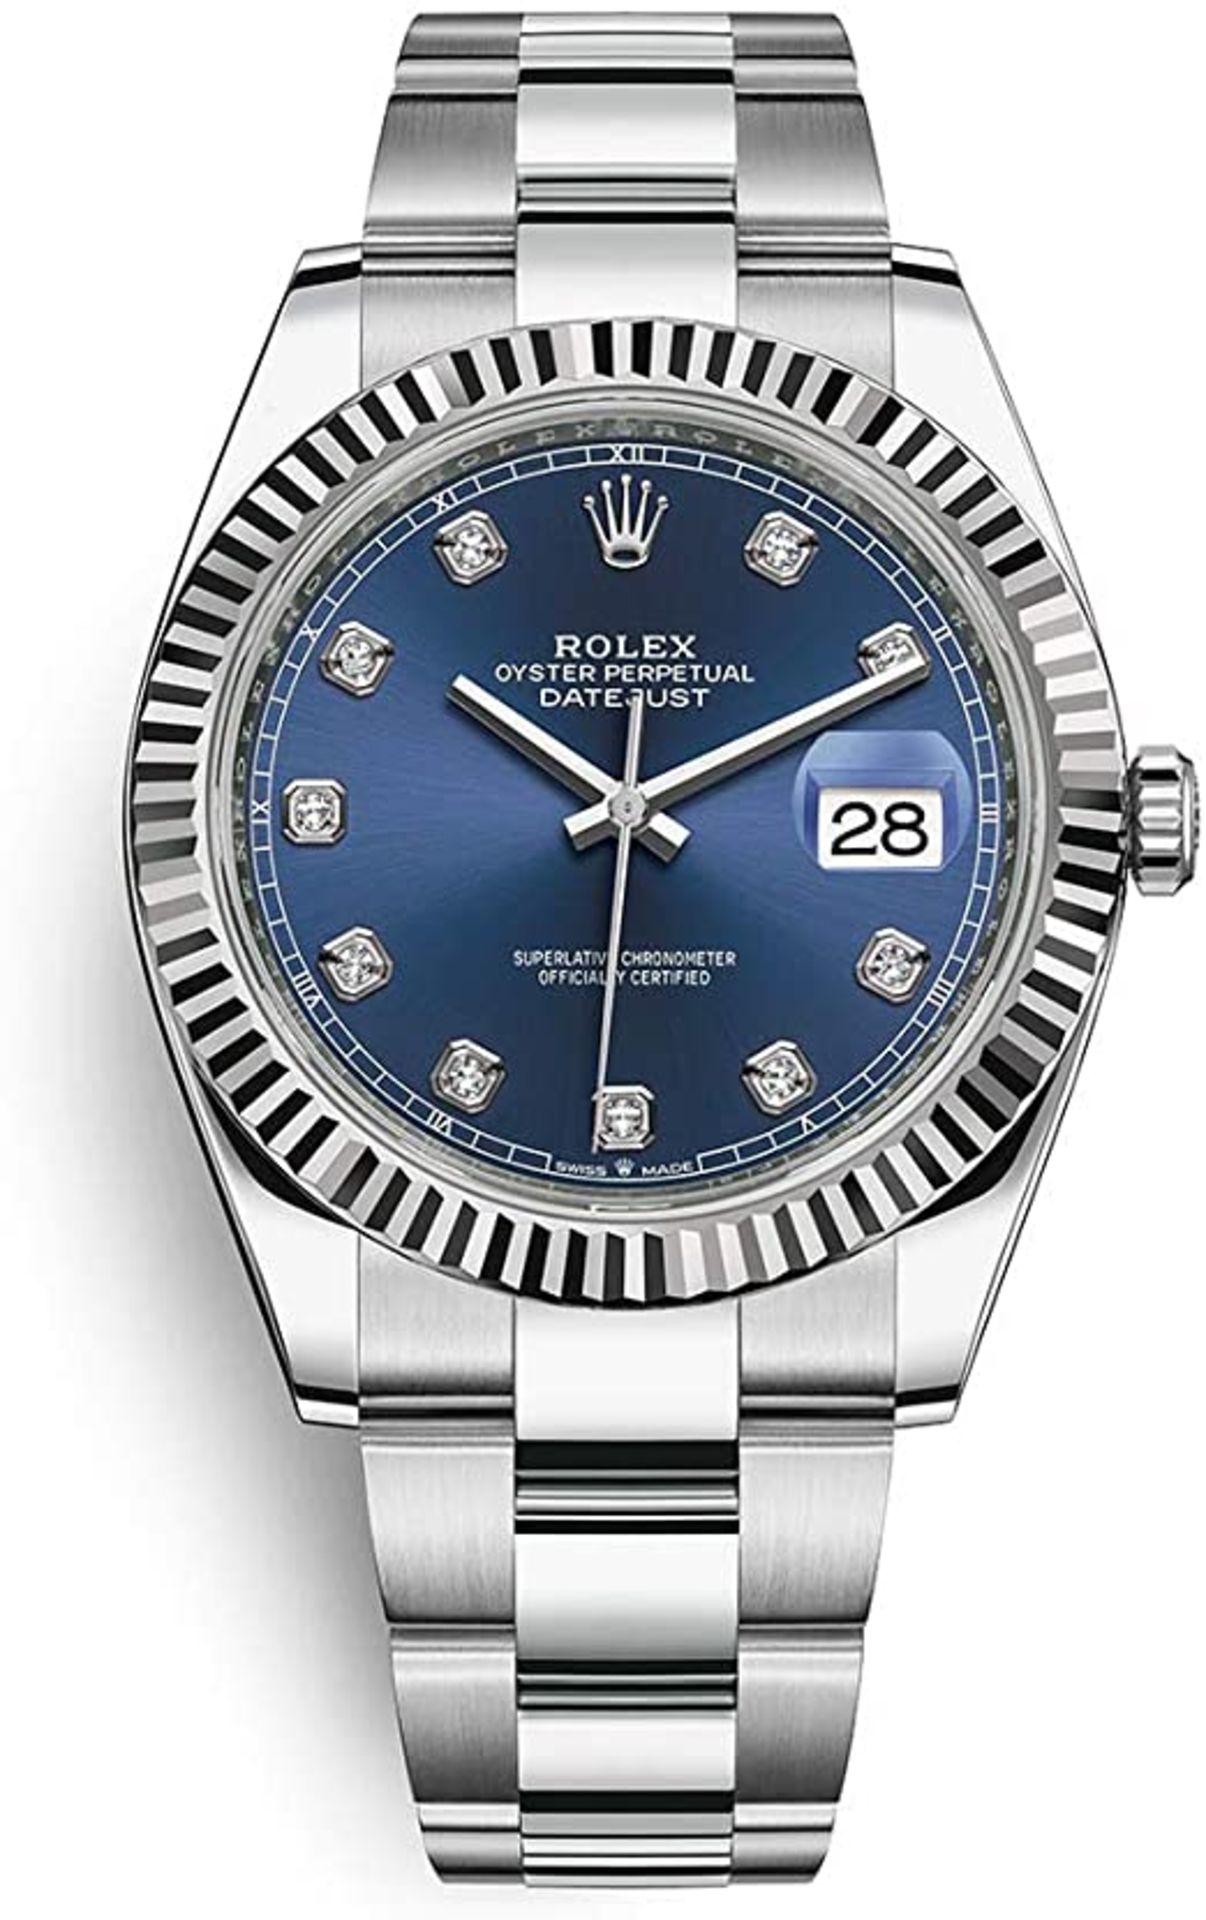 ** ON SALE ** Rolex Date-Just 41mm White Gold OysterSteel 2021 Blue Diamond Dial ** Brand New **